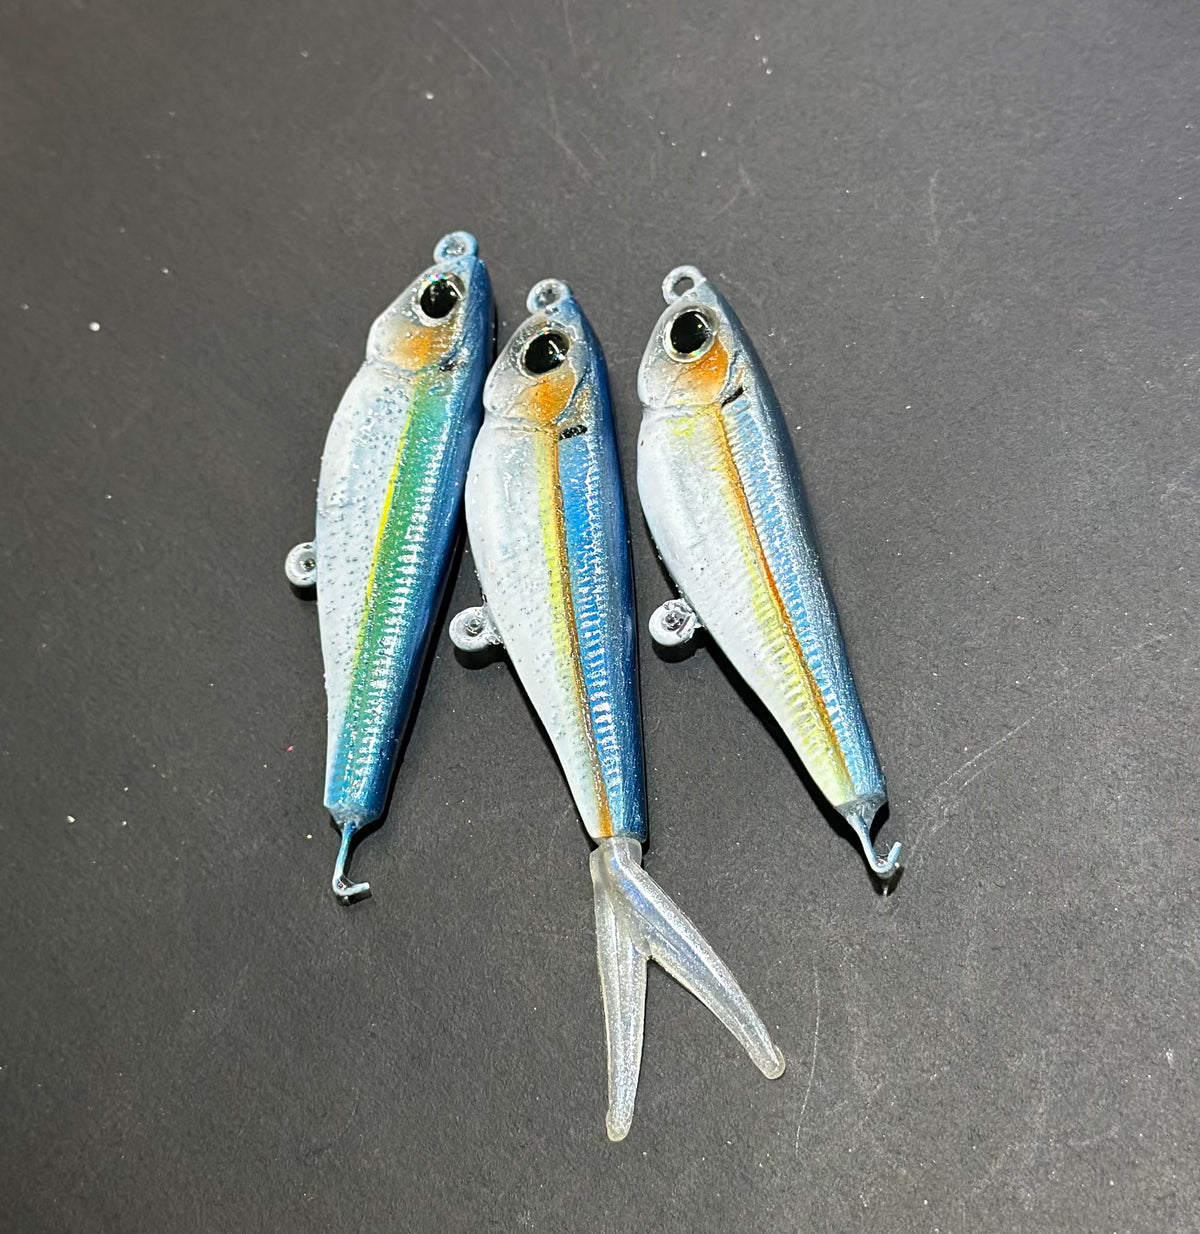 Tailored Tackle 25p 5 Wacky Worm Anise Bass Fishing Lure Bait